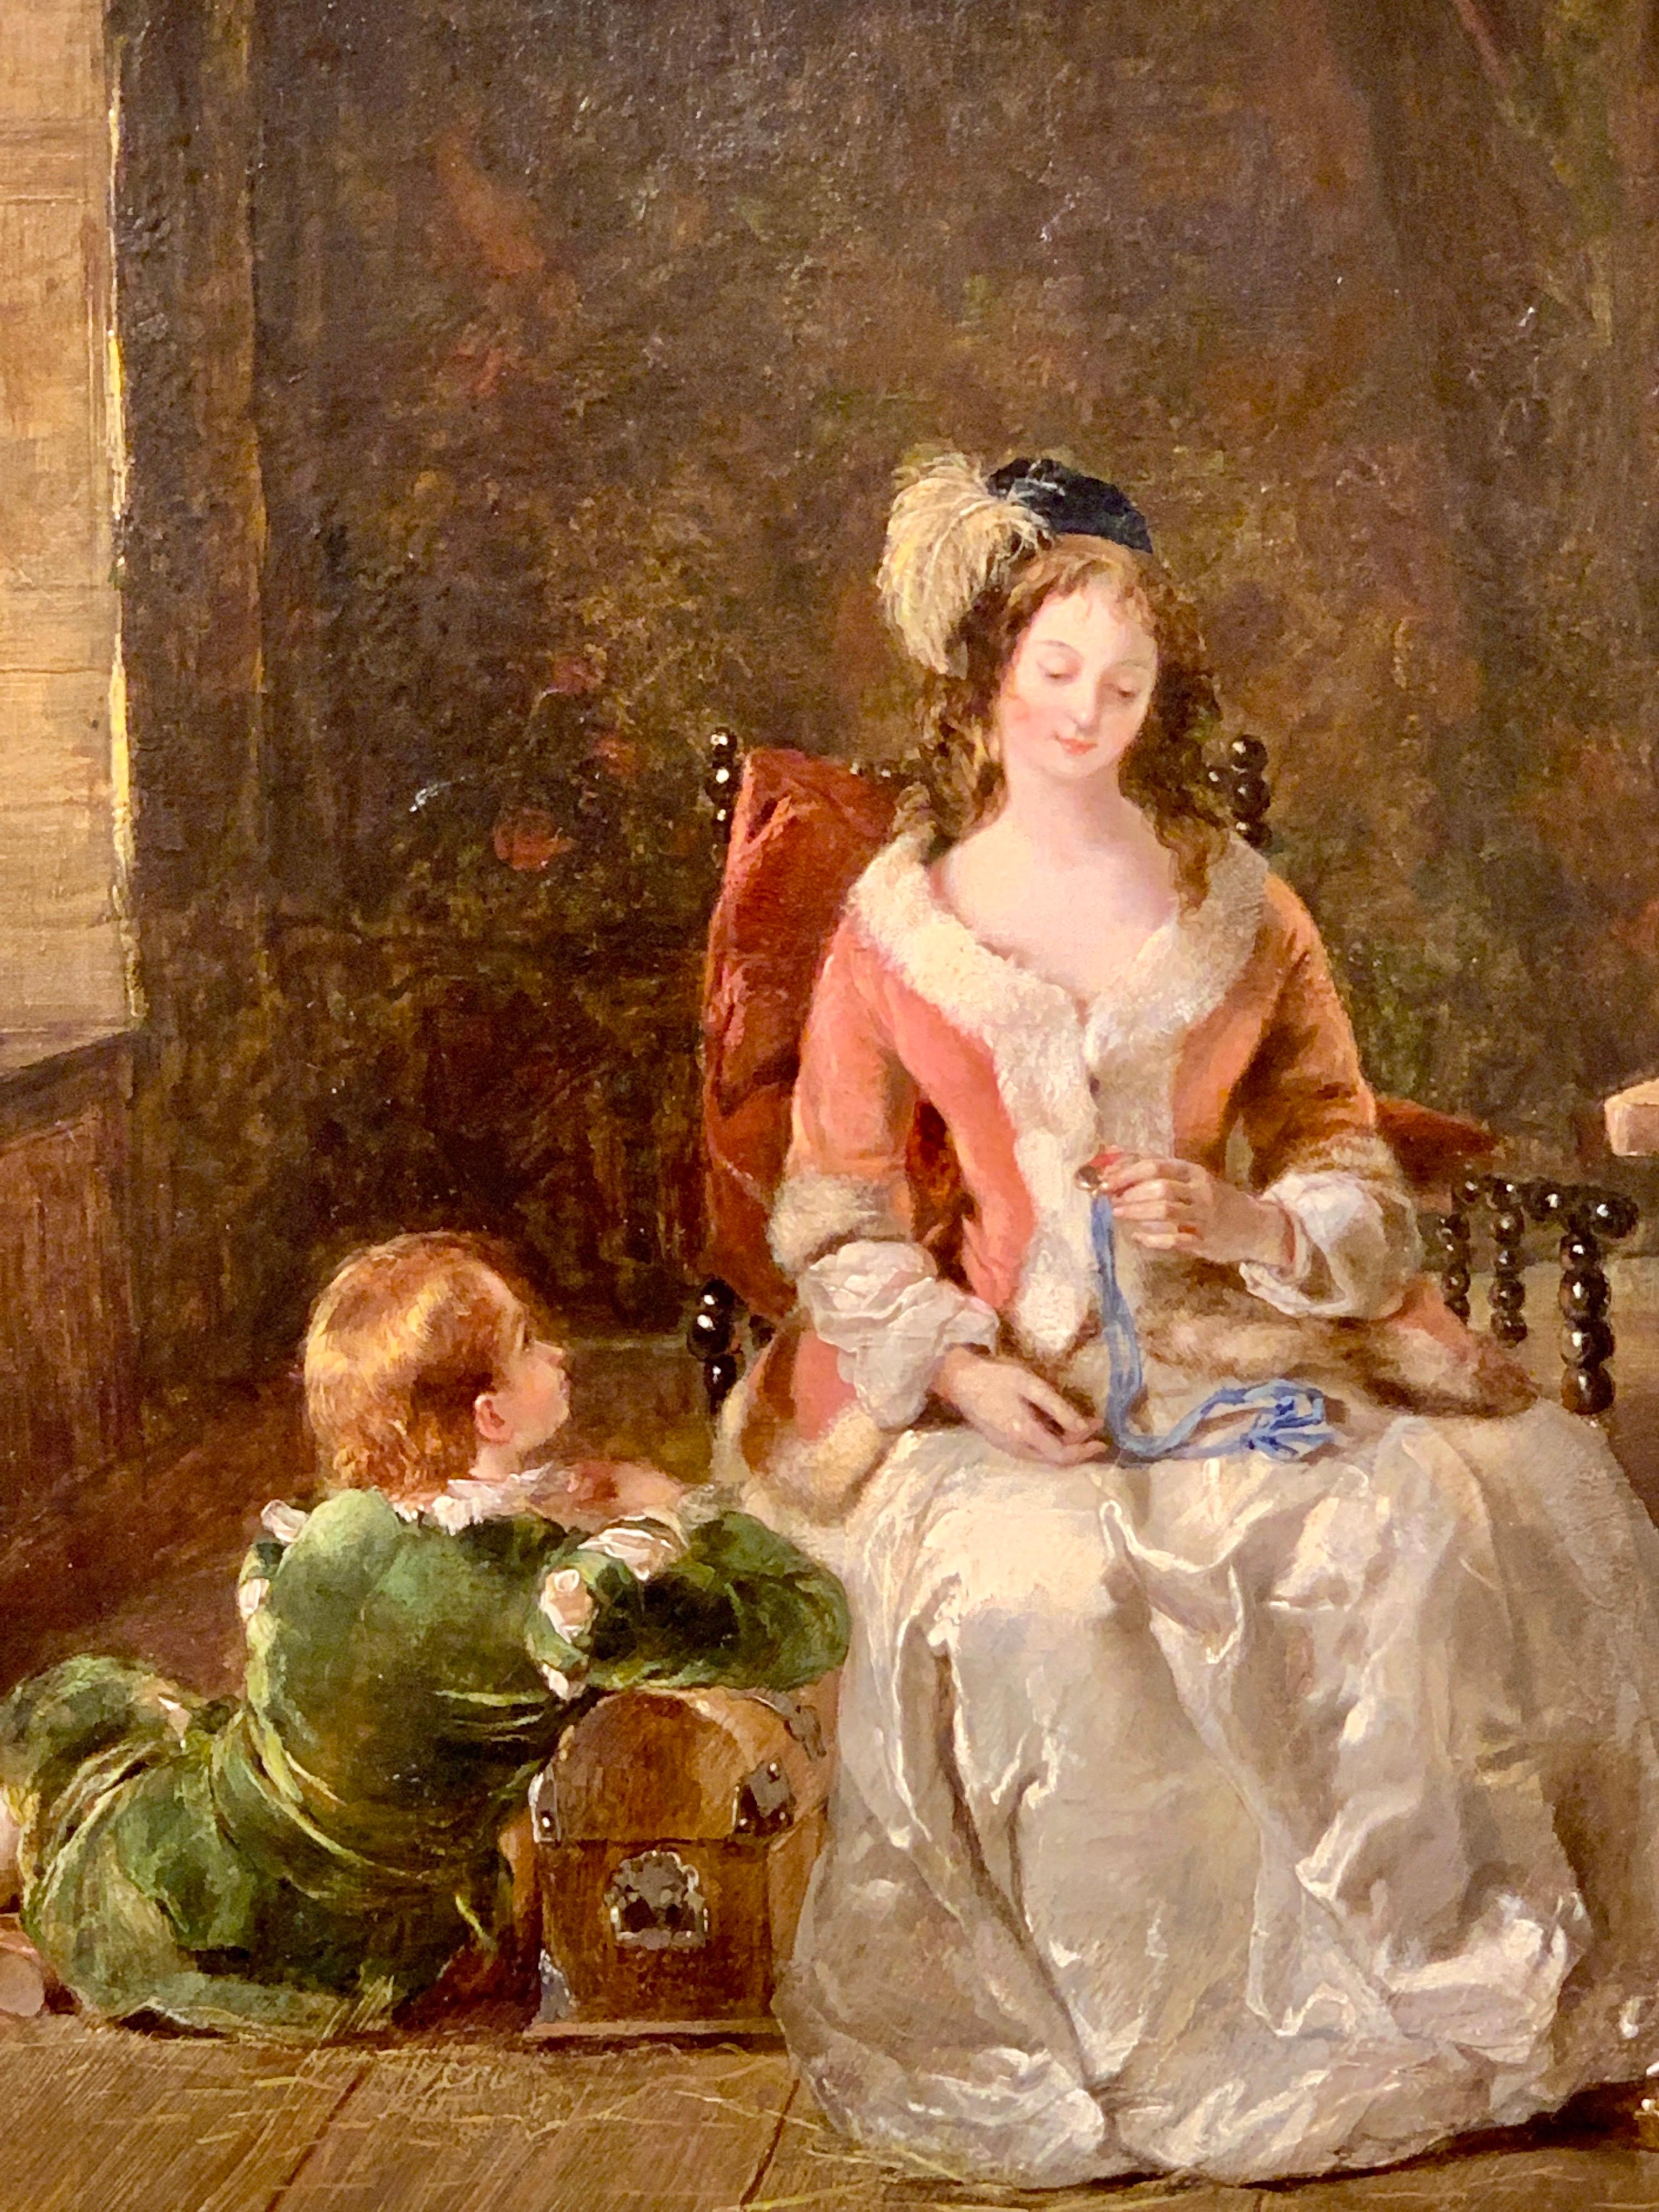 Antique English 19th century interior with mother and child and family treasures - Painting by Daniel Pasmore